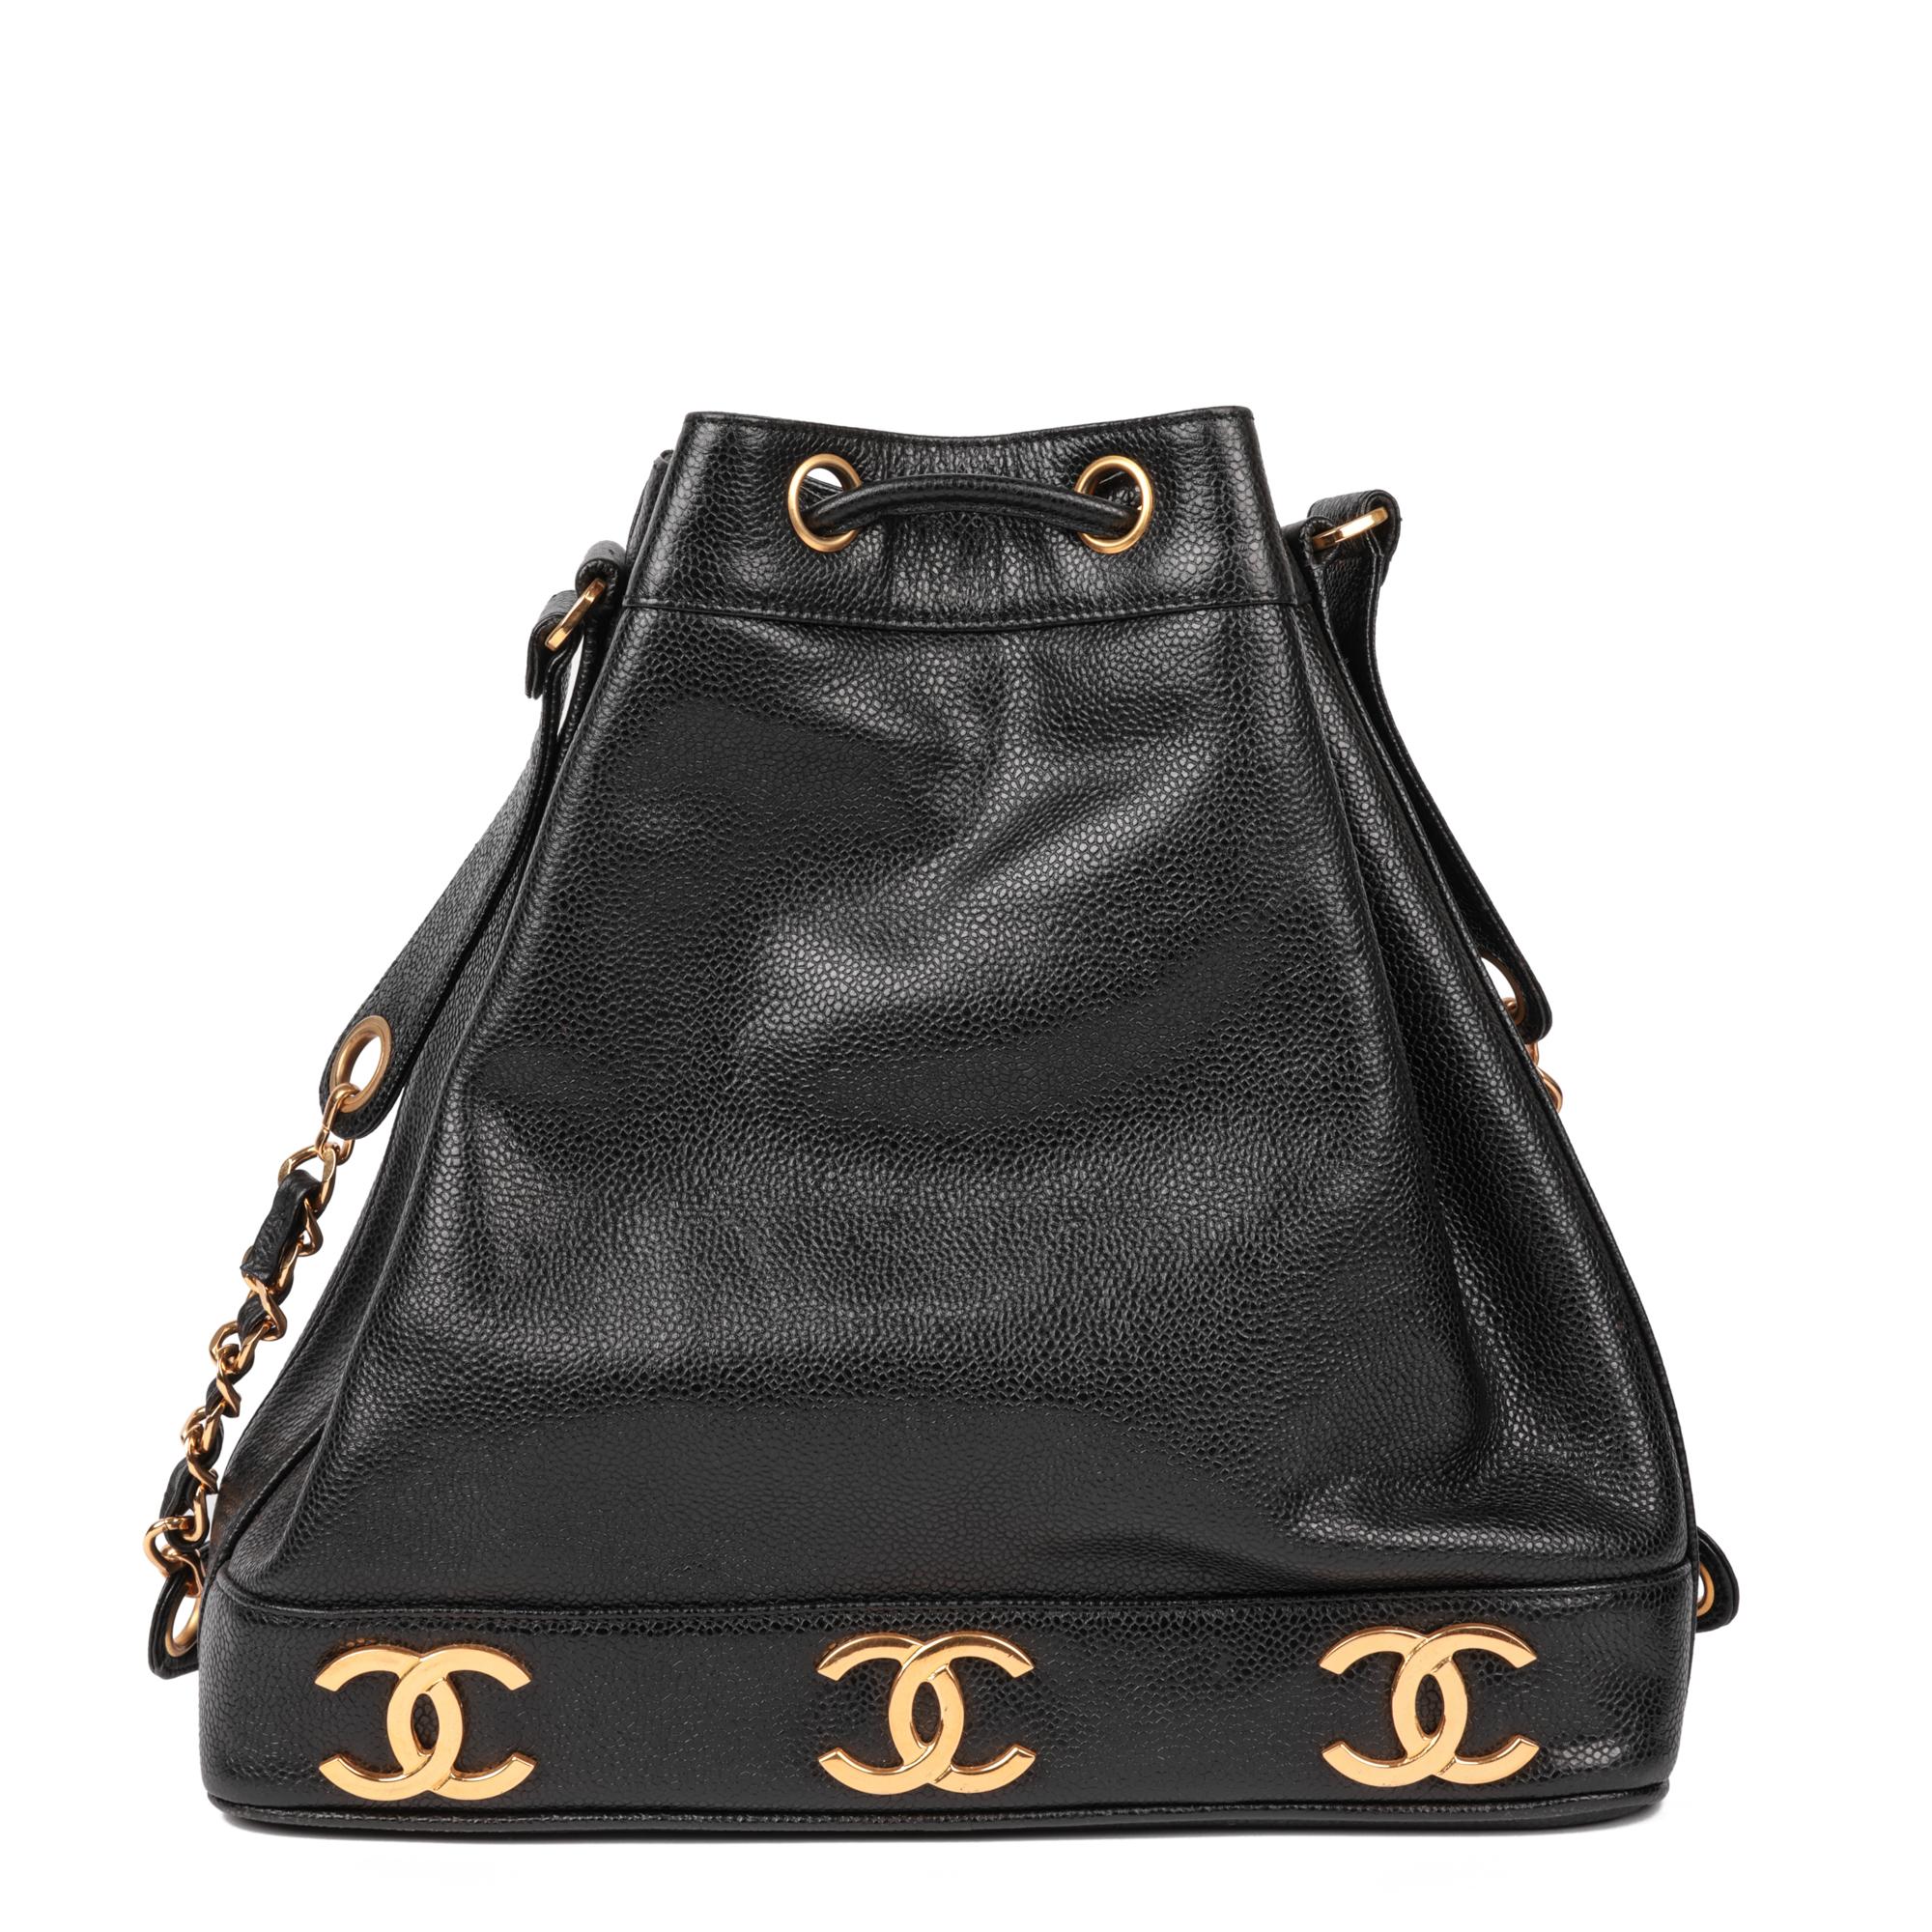 Women's CHANEL Black Caviar Leather Vintage Classic Logo Trim Bucket Bag with Pouch